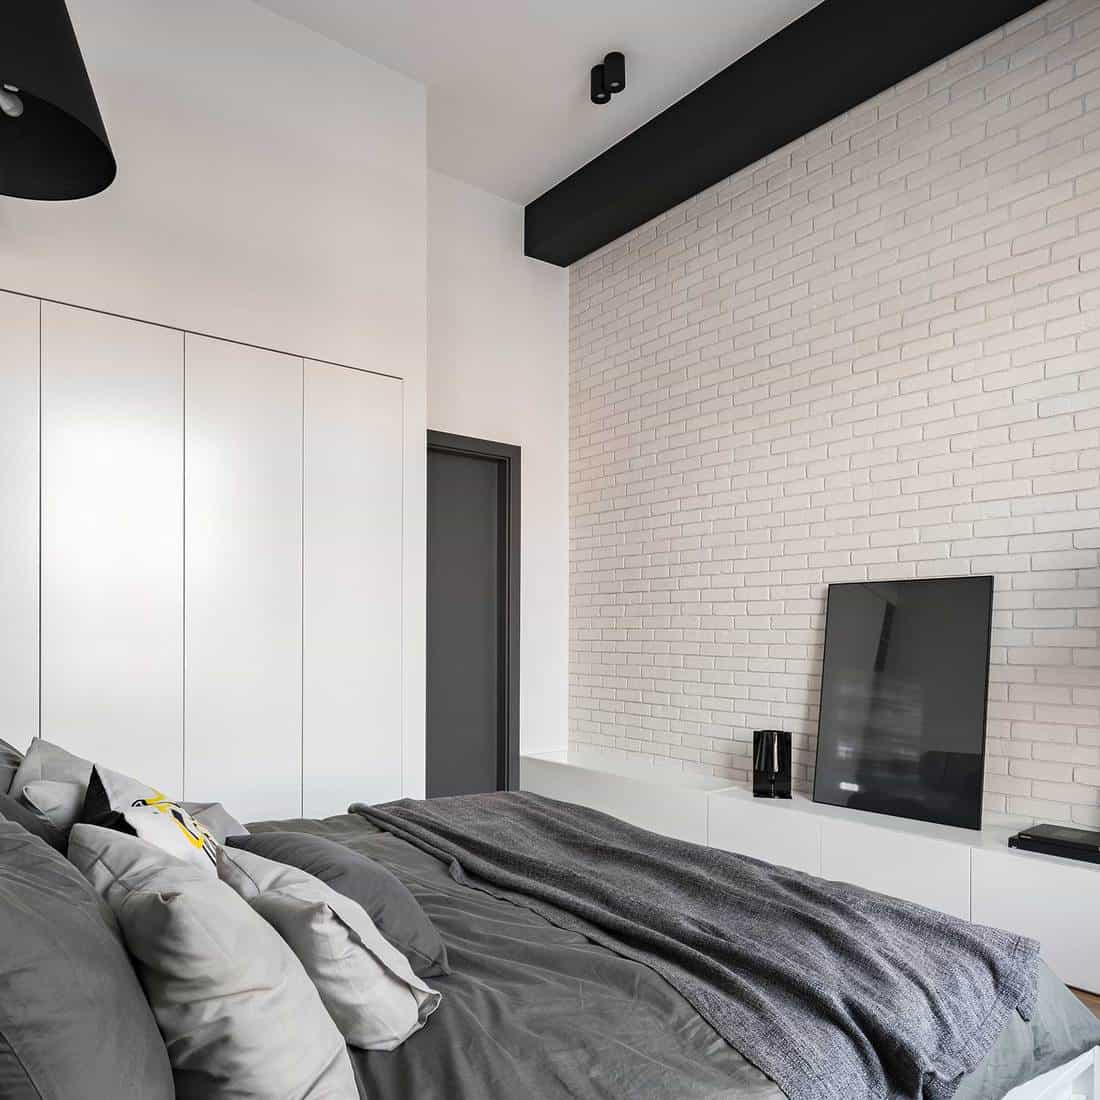 Bedroom with white brick wall and bed with grey sheet, pillows and blanket